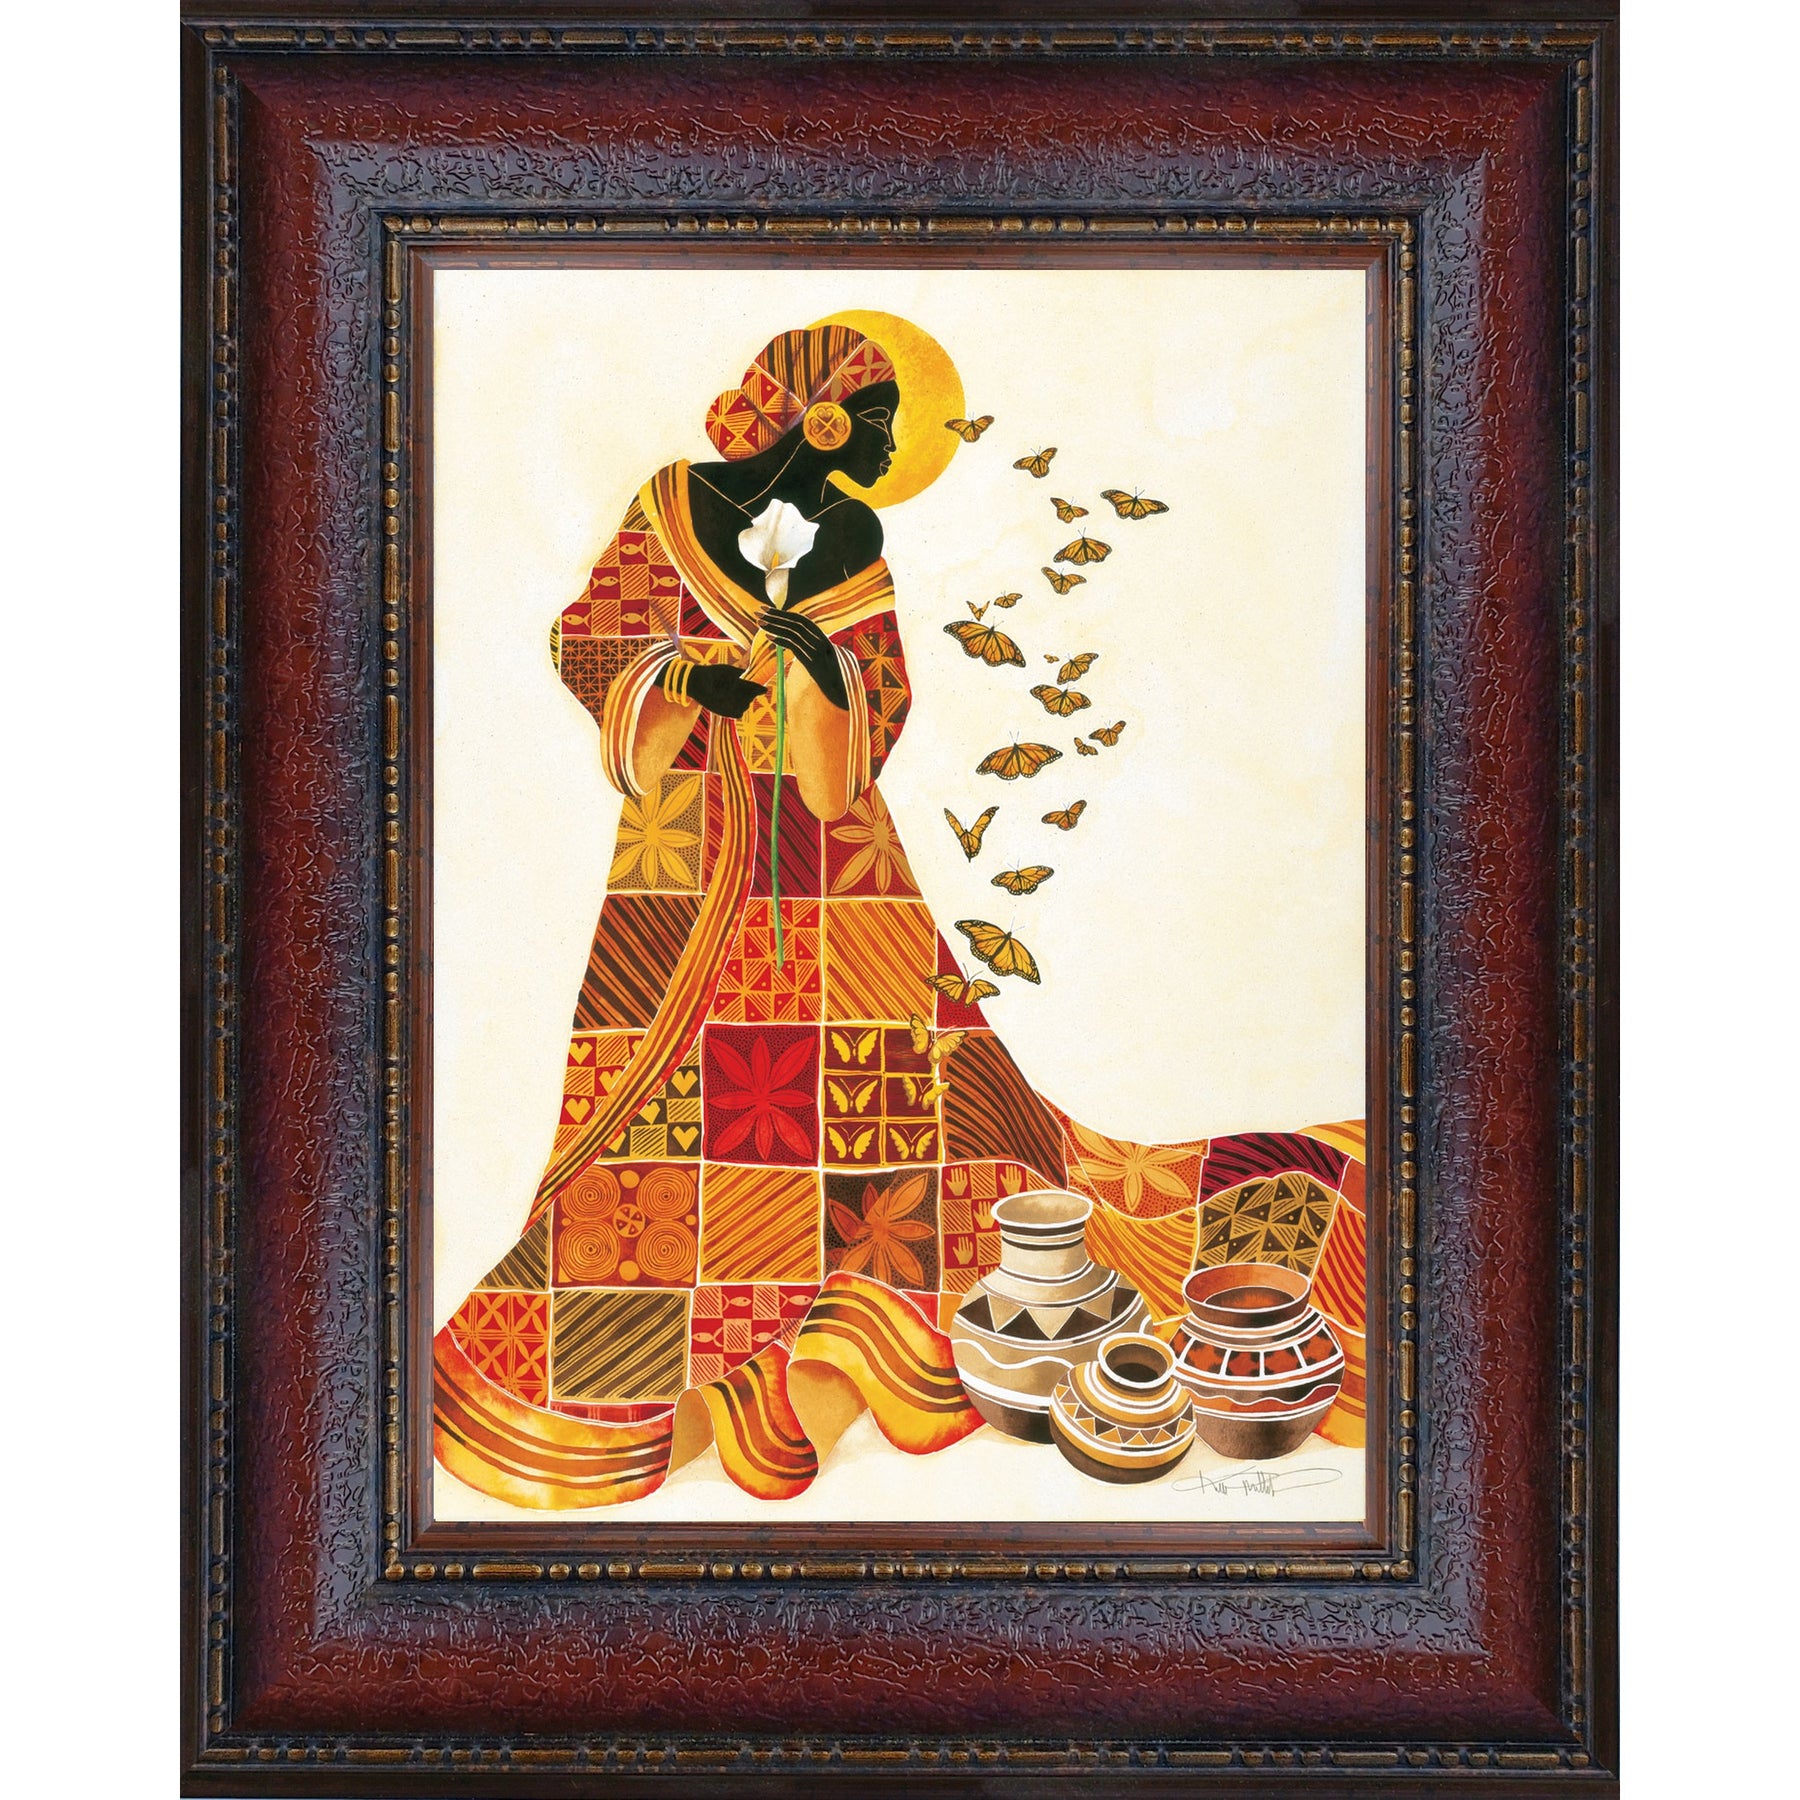 2 of 3: Soul's Flight by Keith Mallett (Brown Frame)